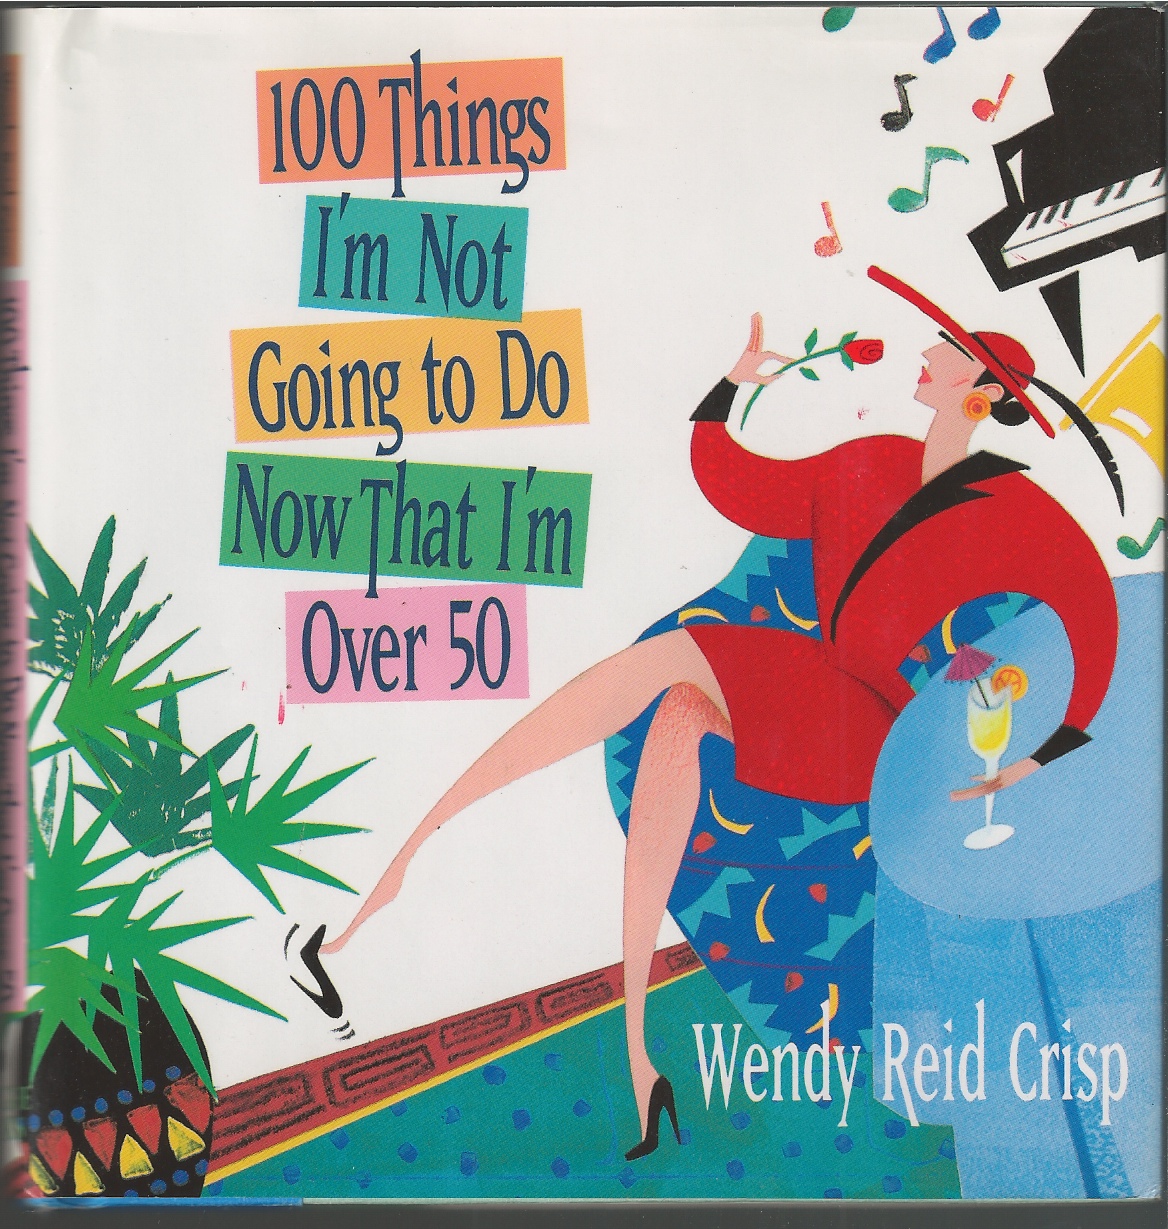 CRISP WENDY REID - 100 Things That I'm Not Going to Do Now That I'm over 50